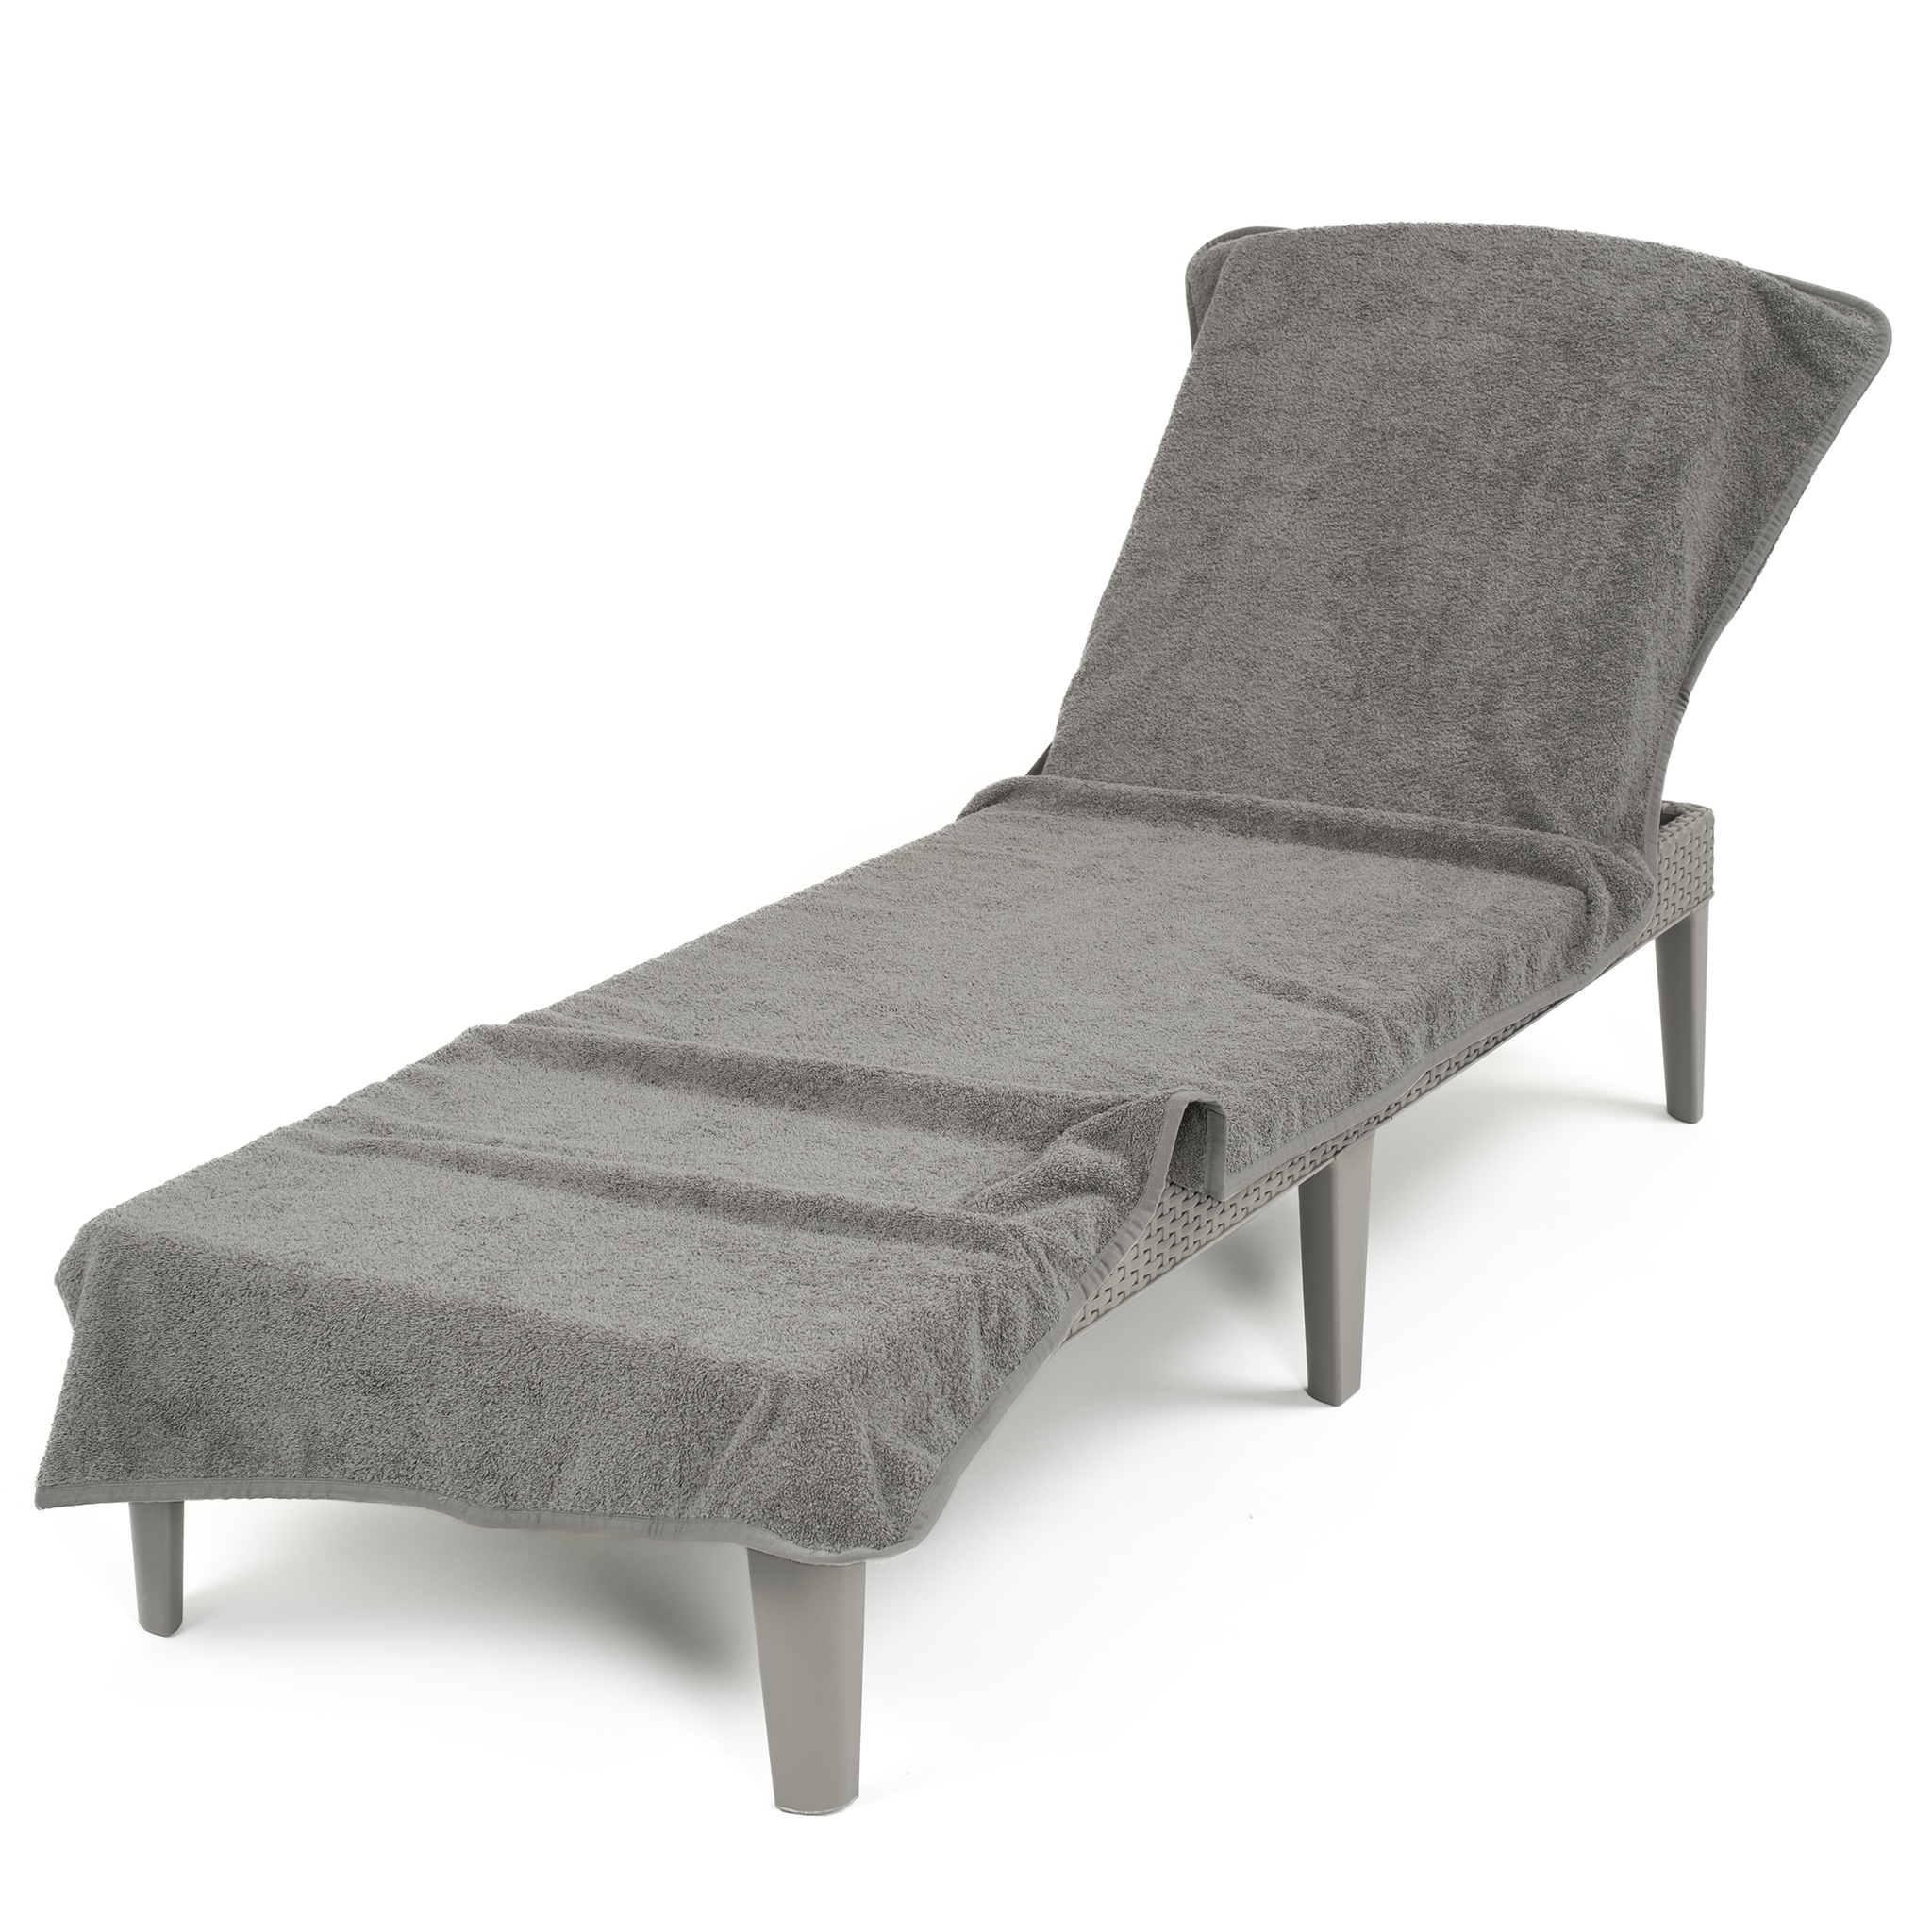 American Soft Linen - Chaise Lounge Covers Towel - 16 Set Case Pack - Gray - 4